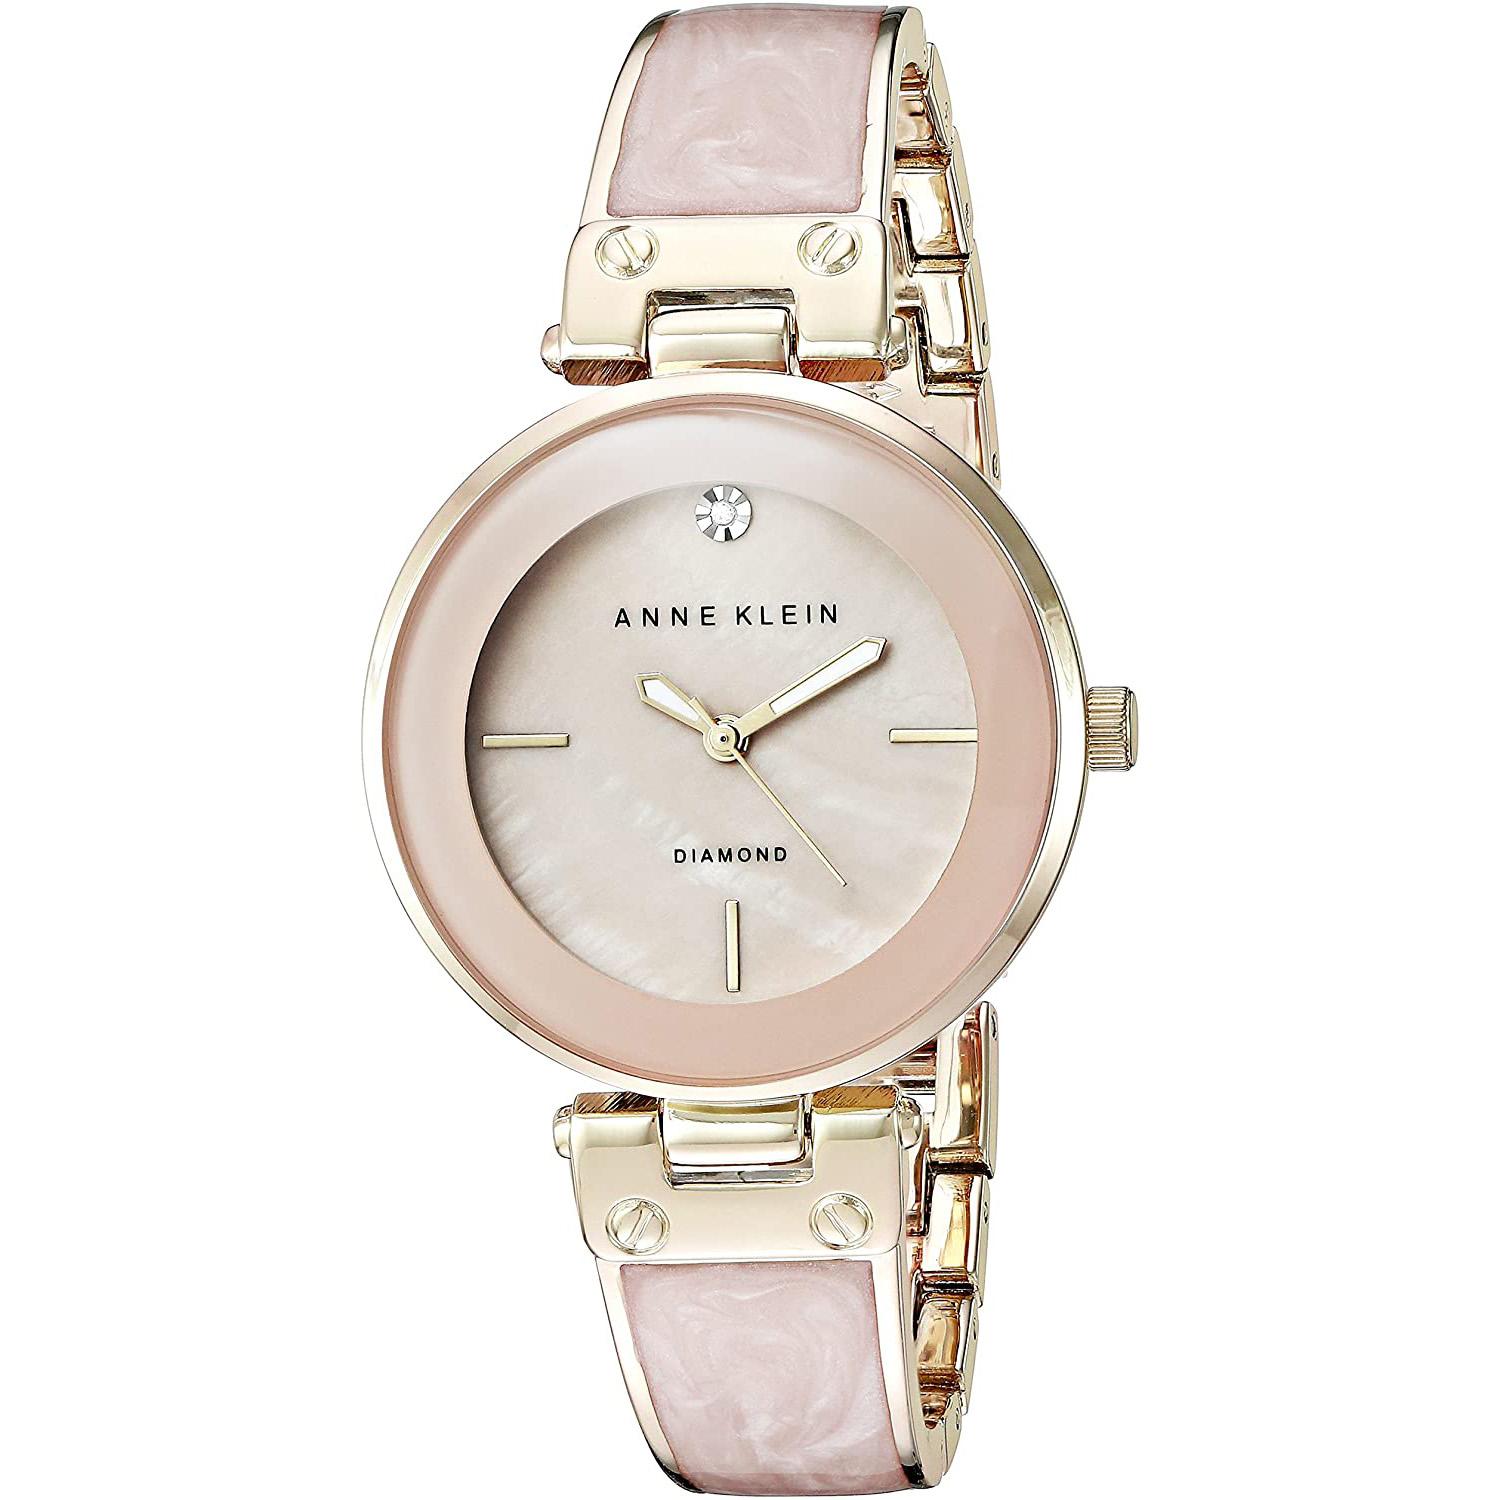 Anne Klein Dress Watch for $29.96 Shipped